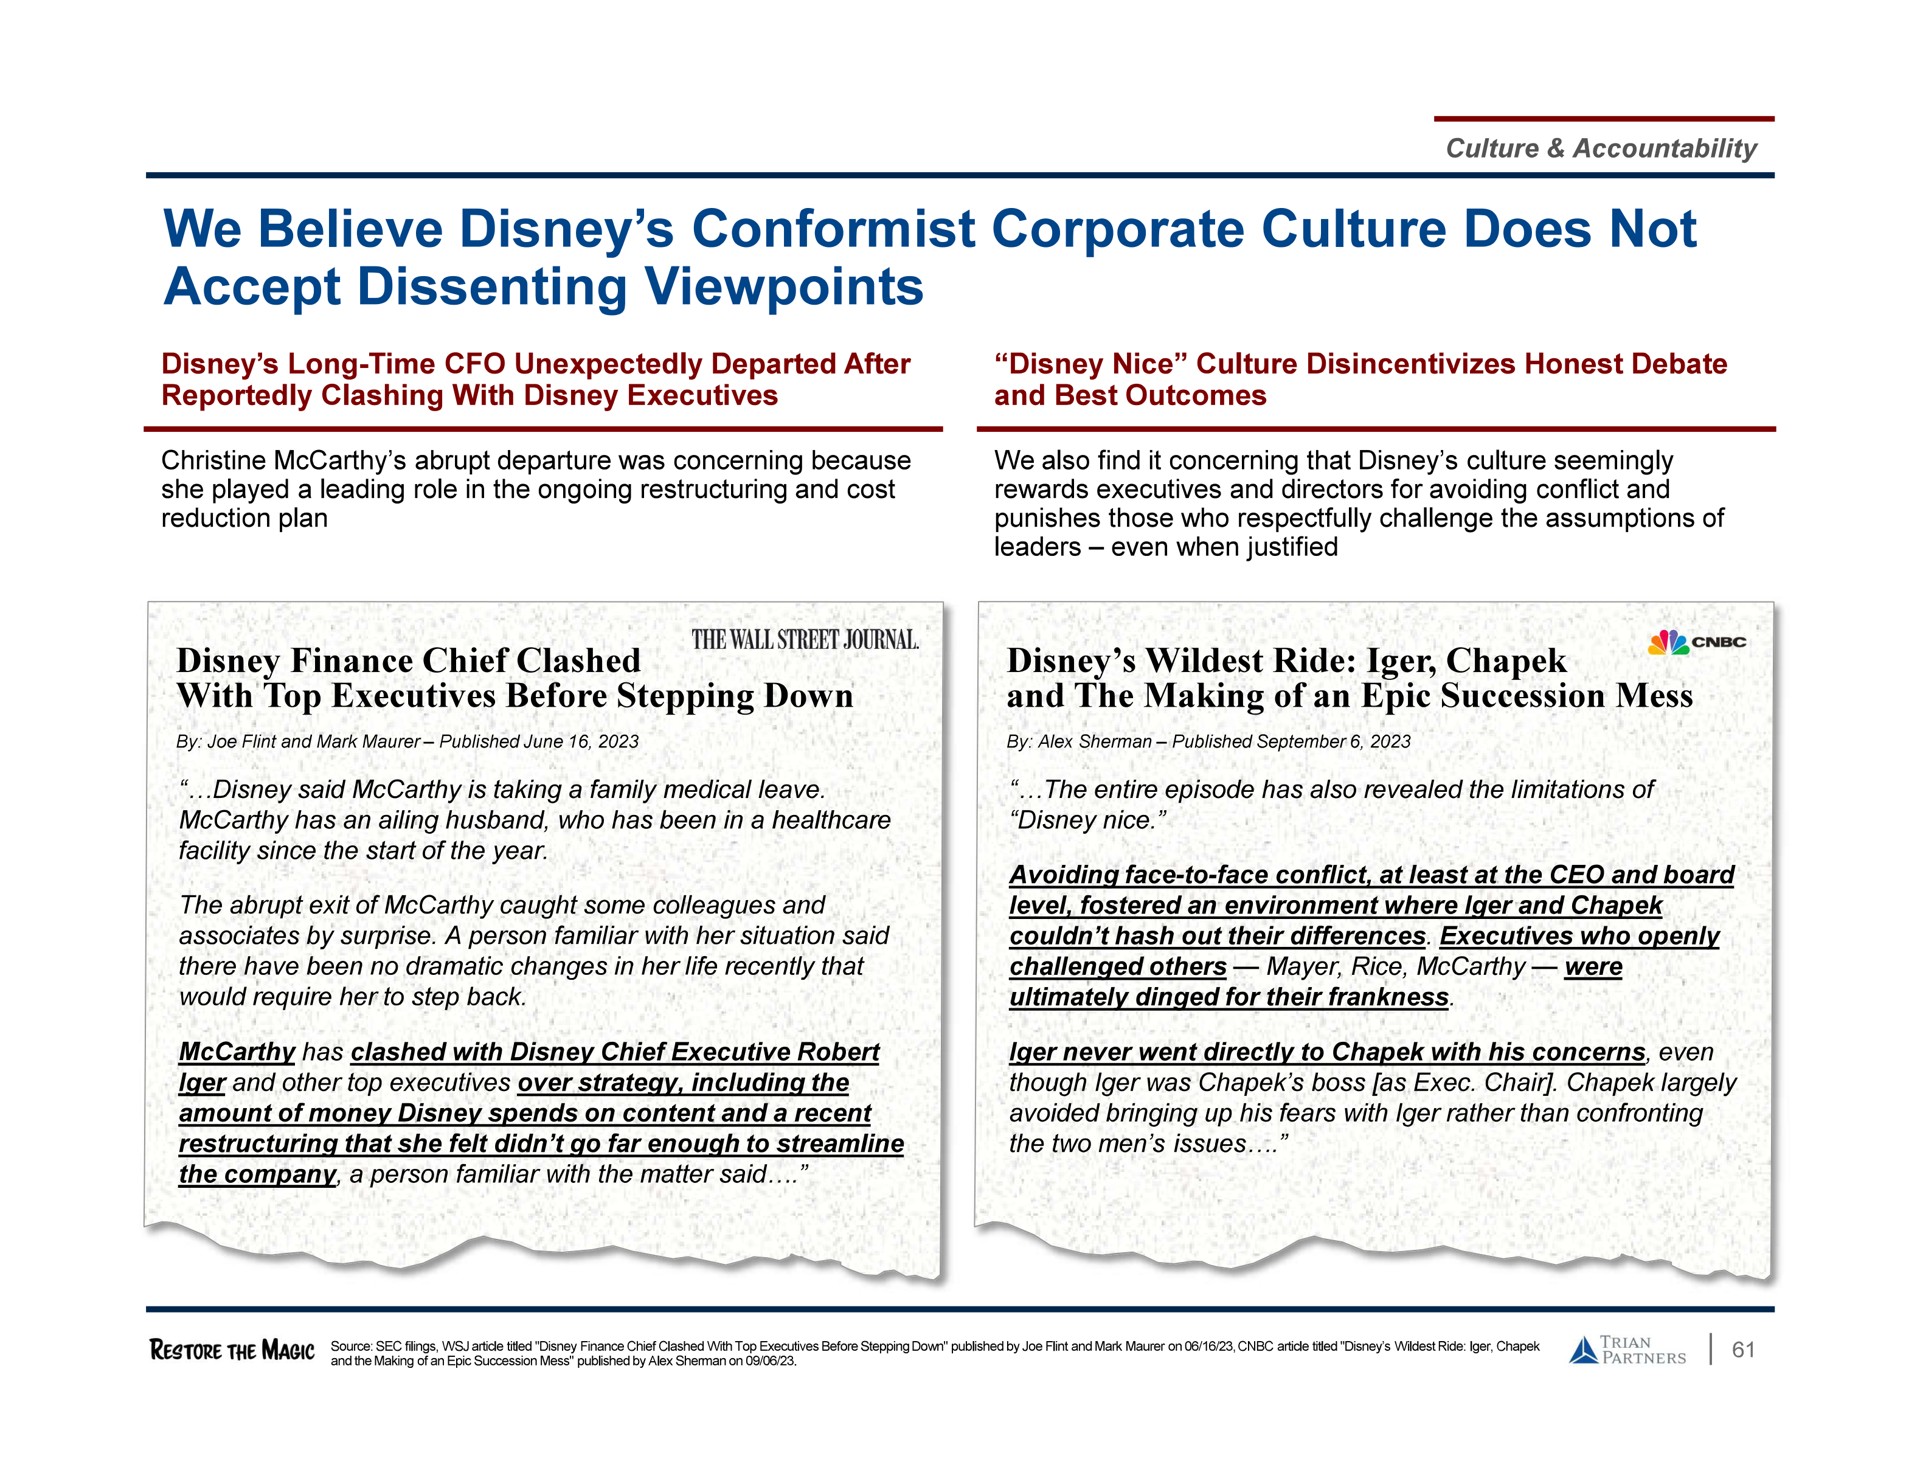 we believe conformist corporate culture does not accept dissenting viewpoints | Trian Partners